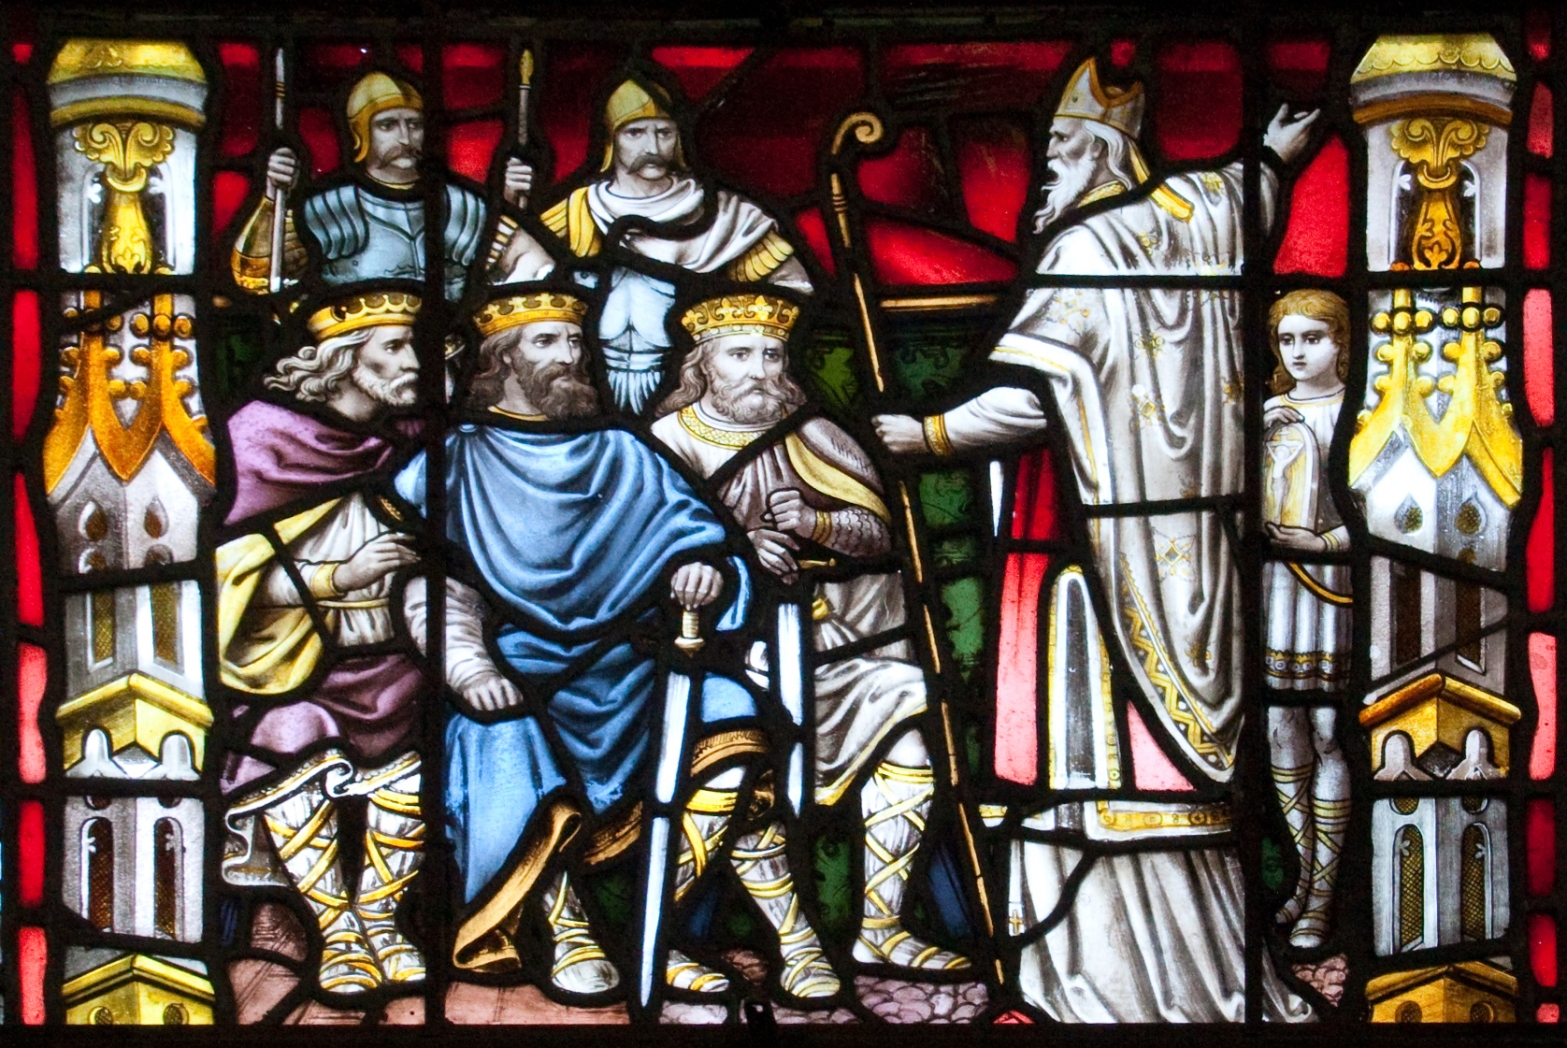 stained glass window showing St. Patrick preaching to Irish kings